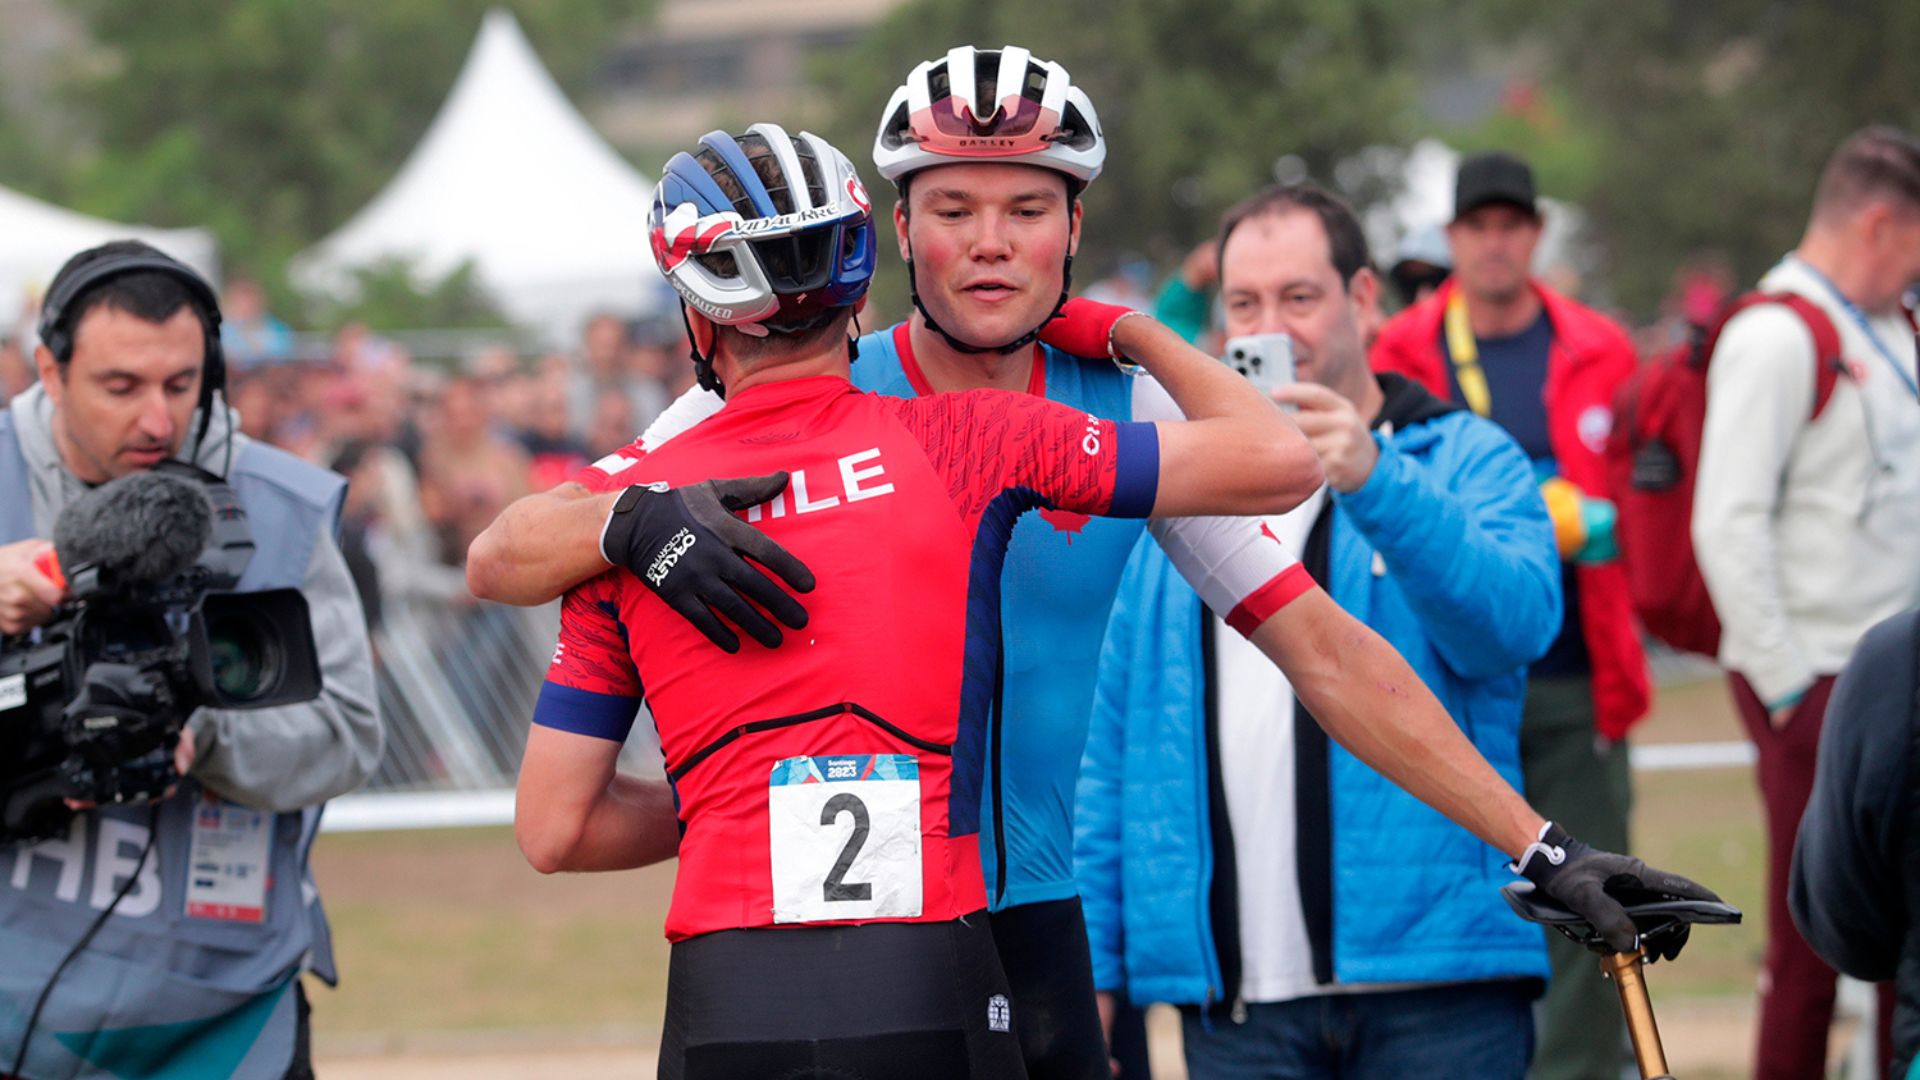 Mountain Bike: Canadian Holmgren claims the gold, Vidaurre takes the silver